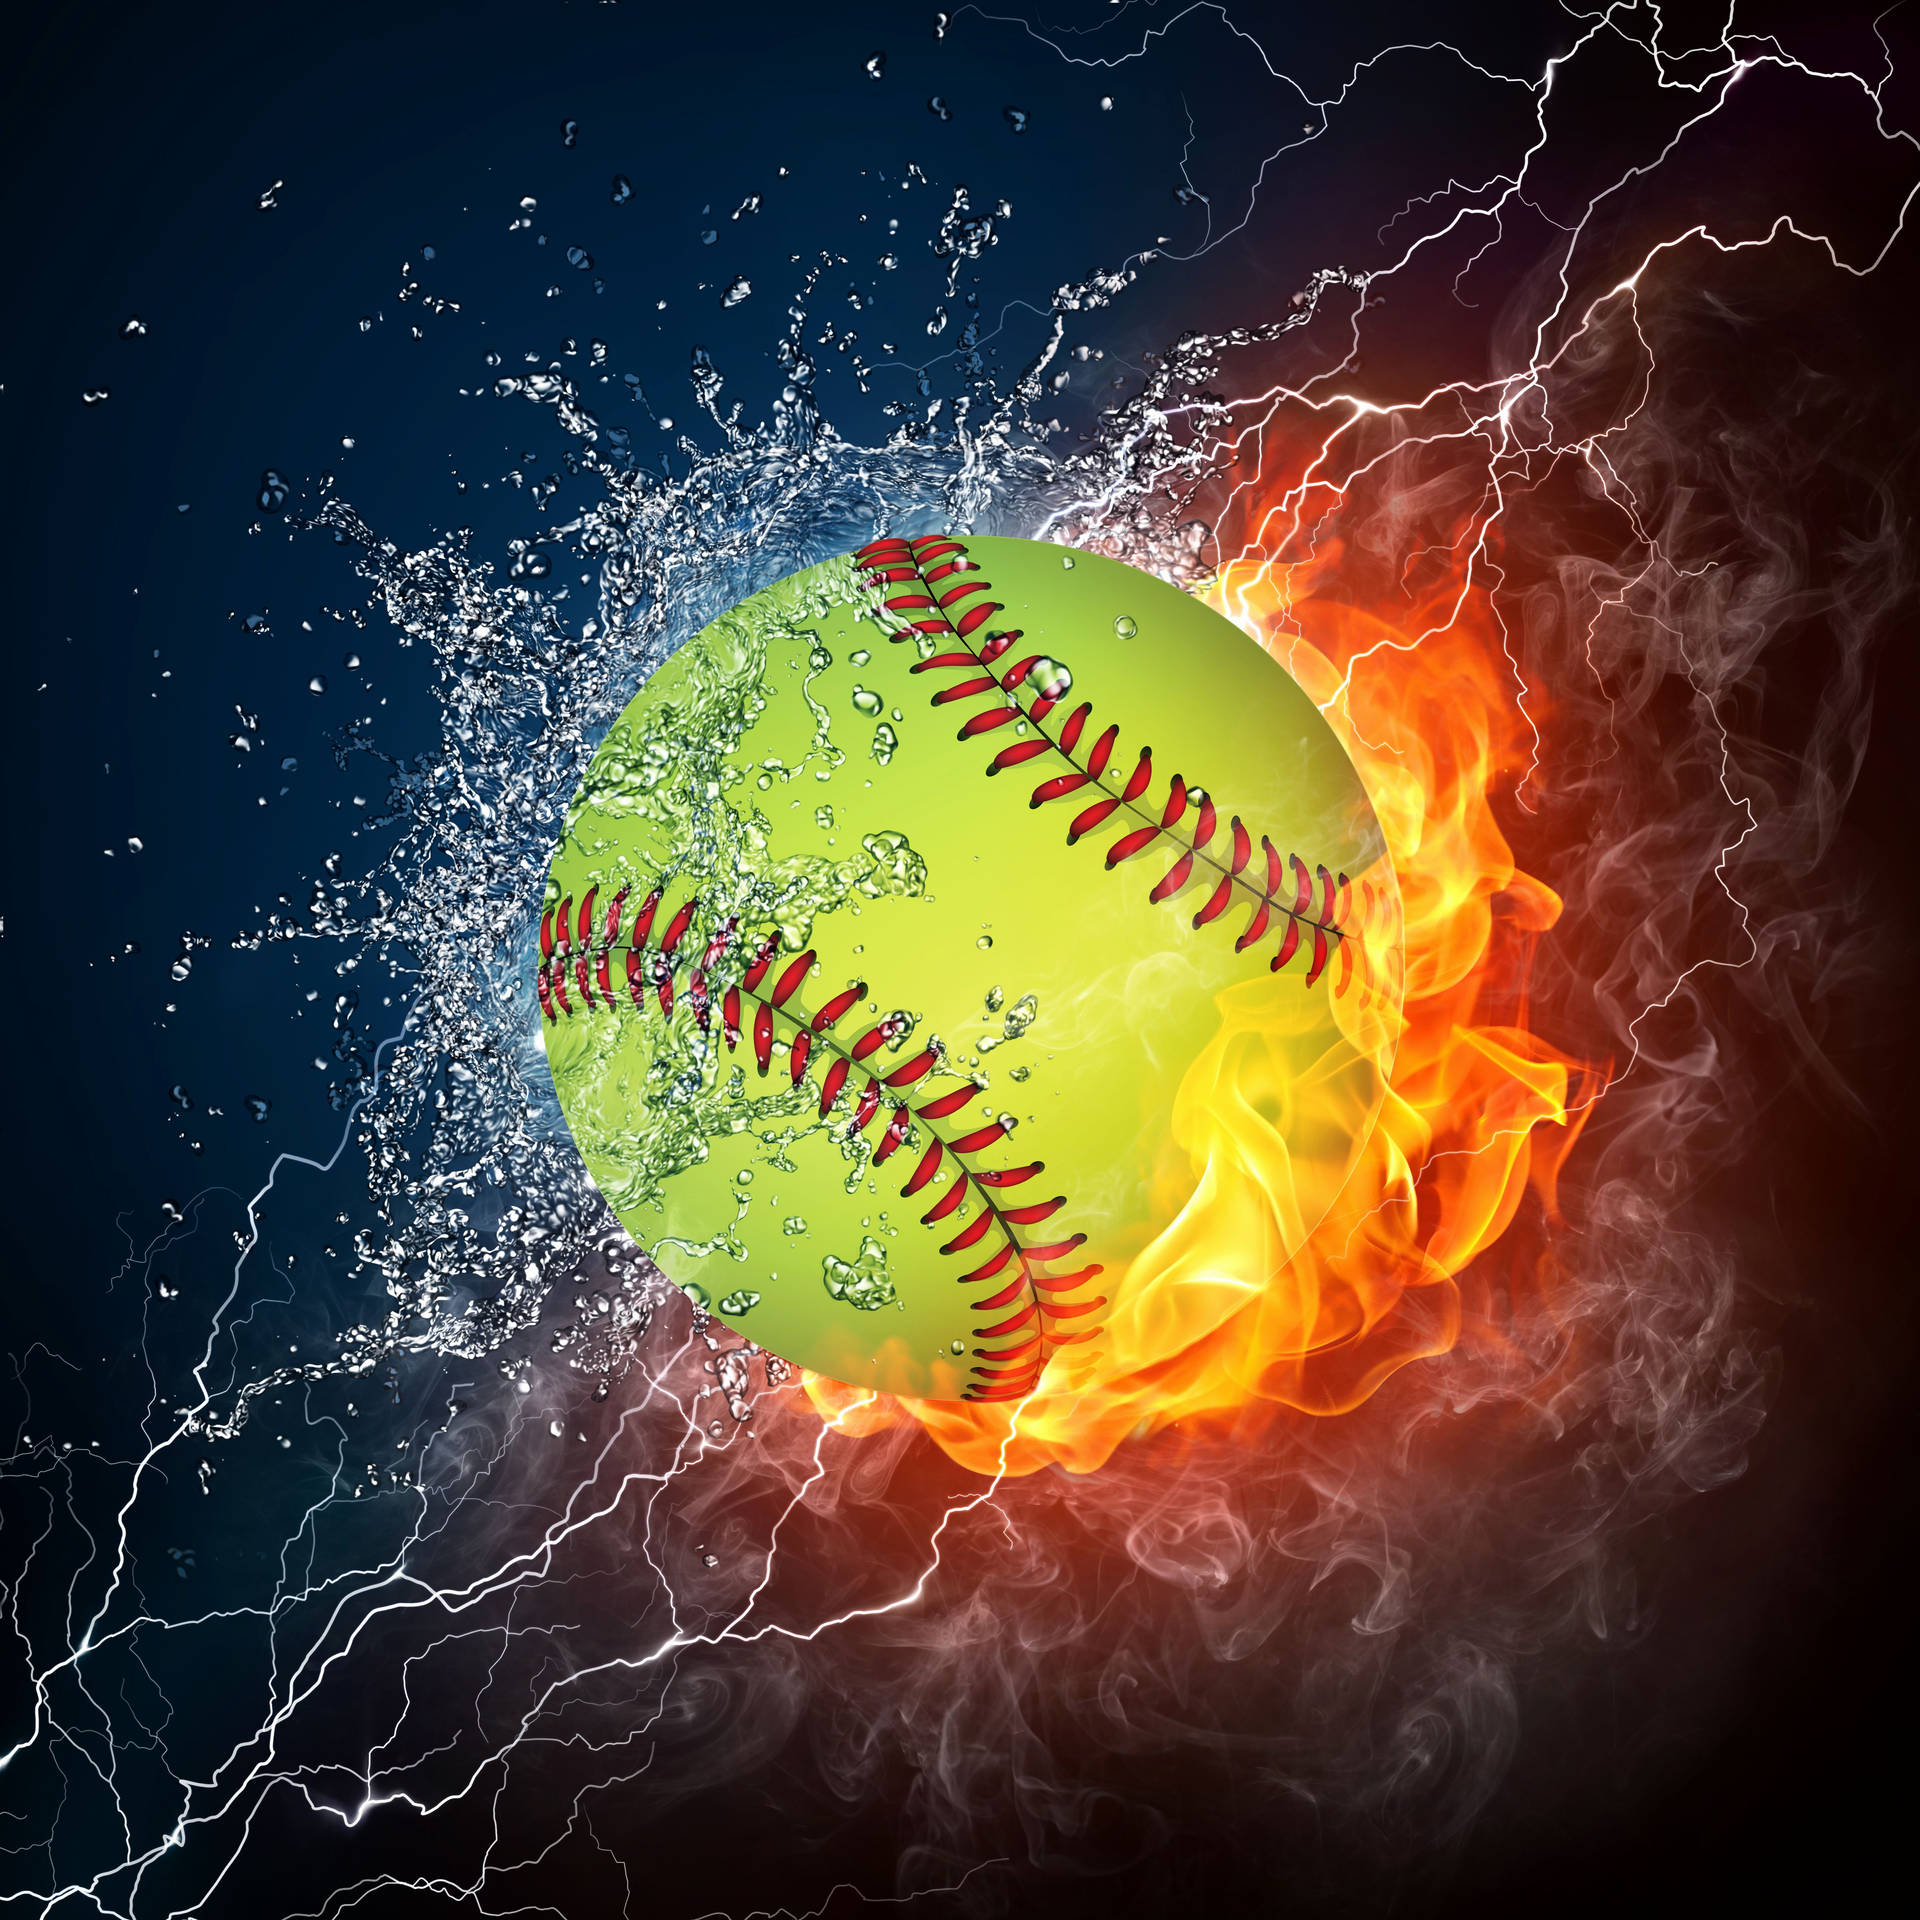 Softball Wallpaper Discover more Background cool Cute Galaxy Iphone  wallpapers httpswwwenjpgcomsoftba  Softball backgrounds Softball  Galaxy wallpaper